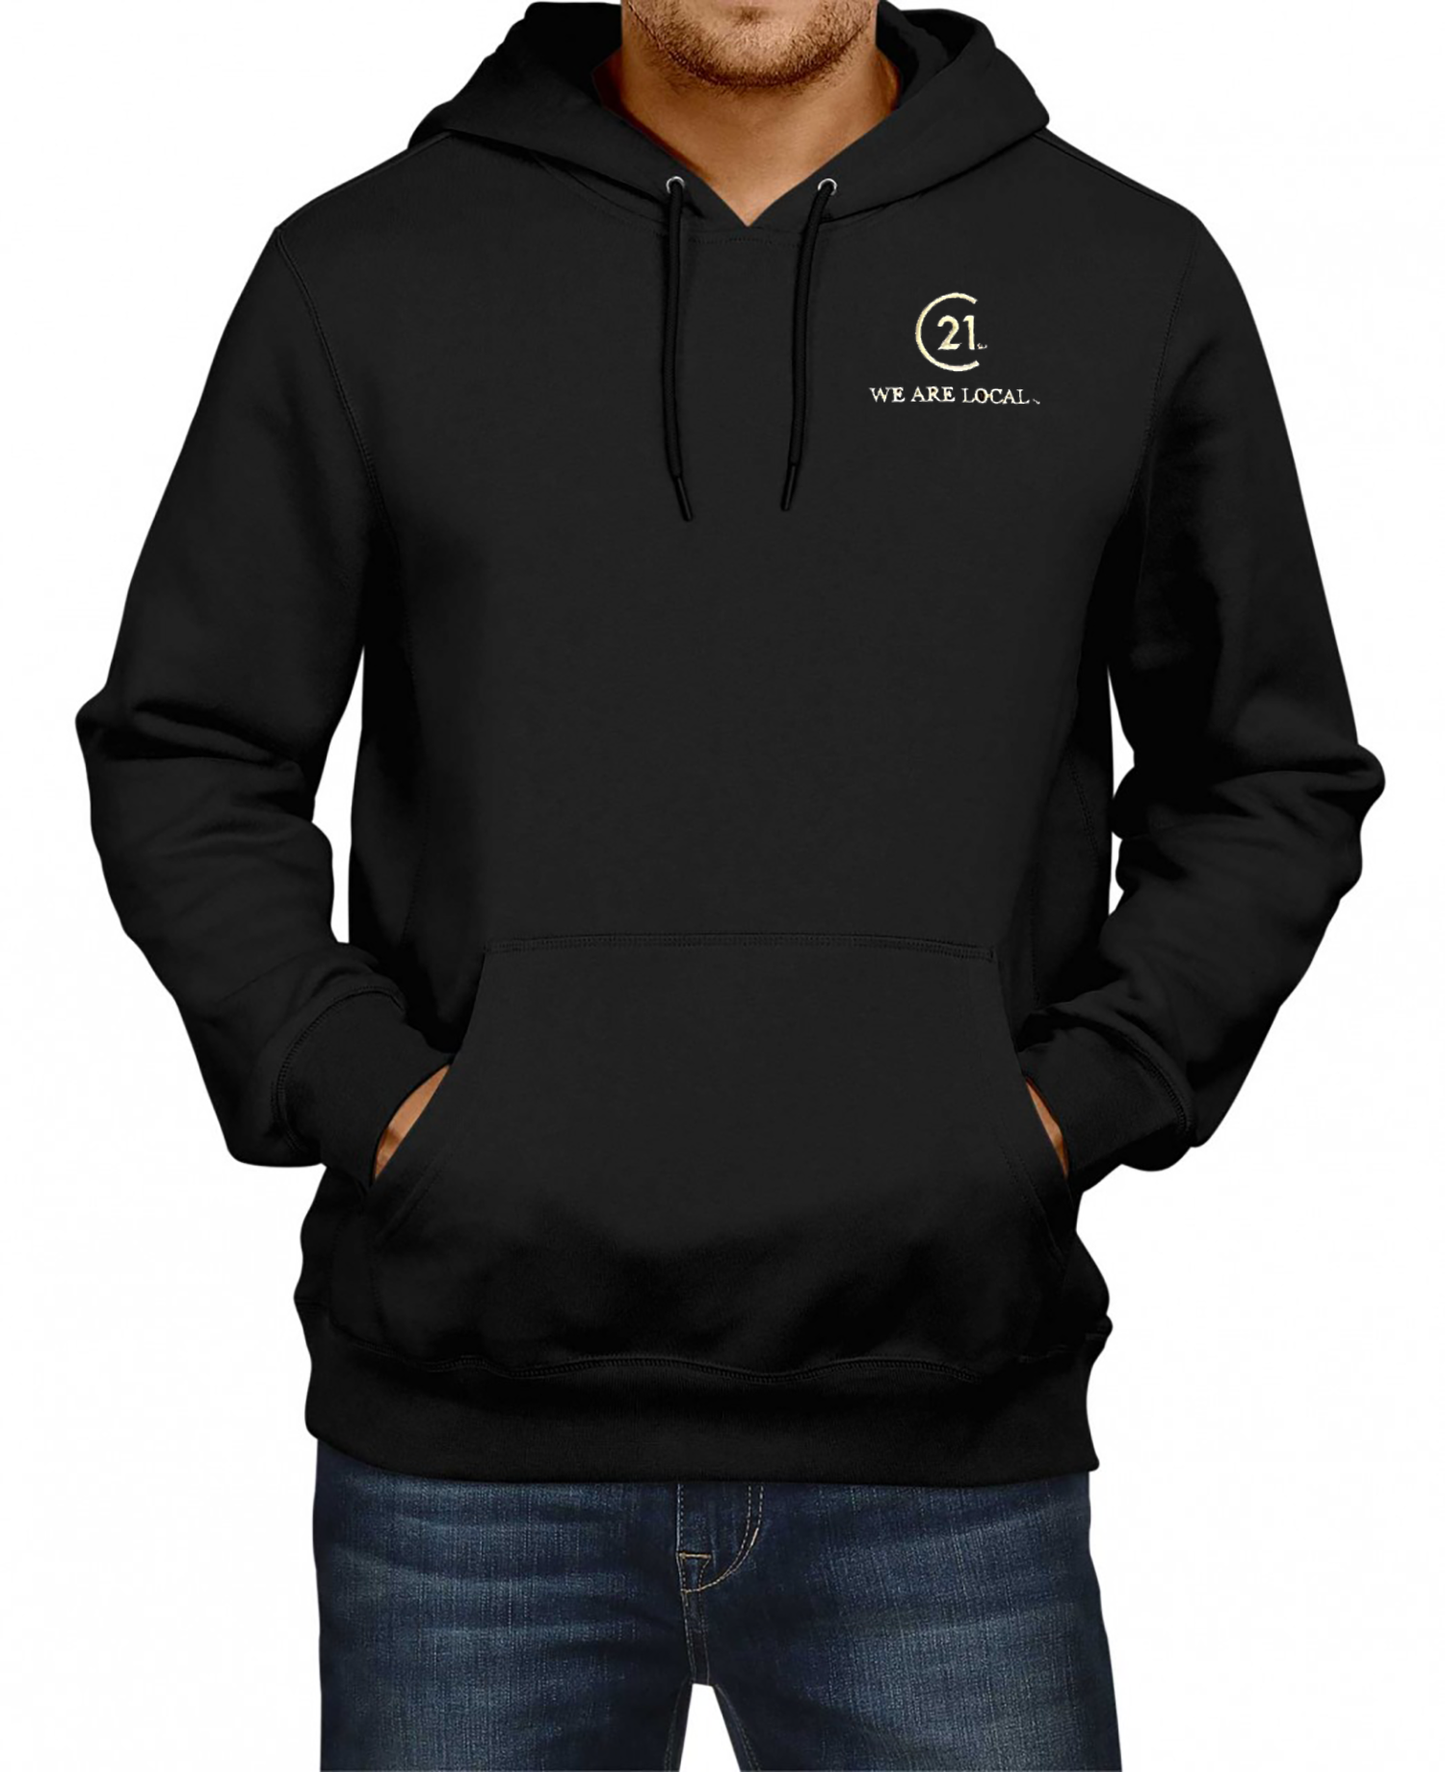 ULTRA SOFT C21 We Are Local Hooded Swag With Embroidered Wordmark